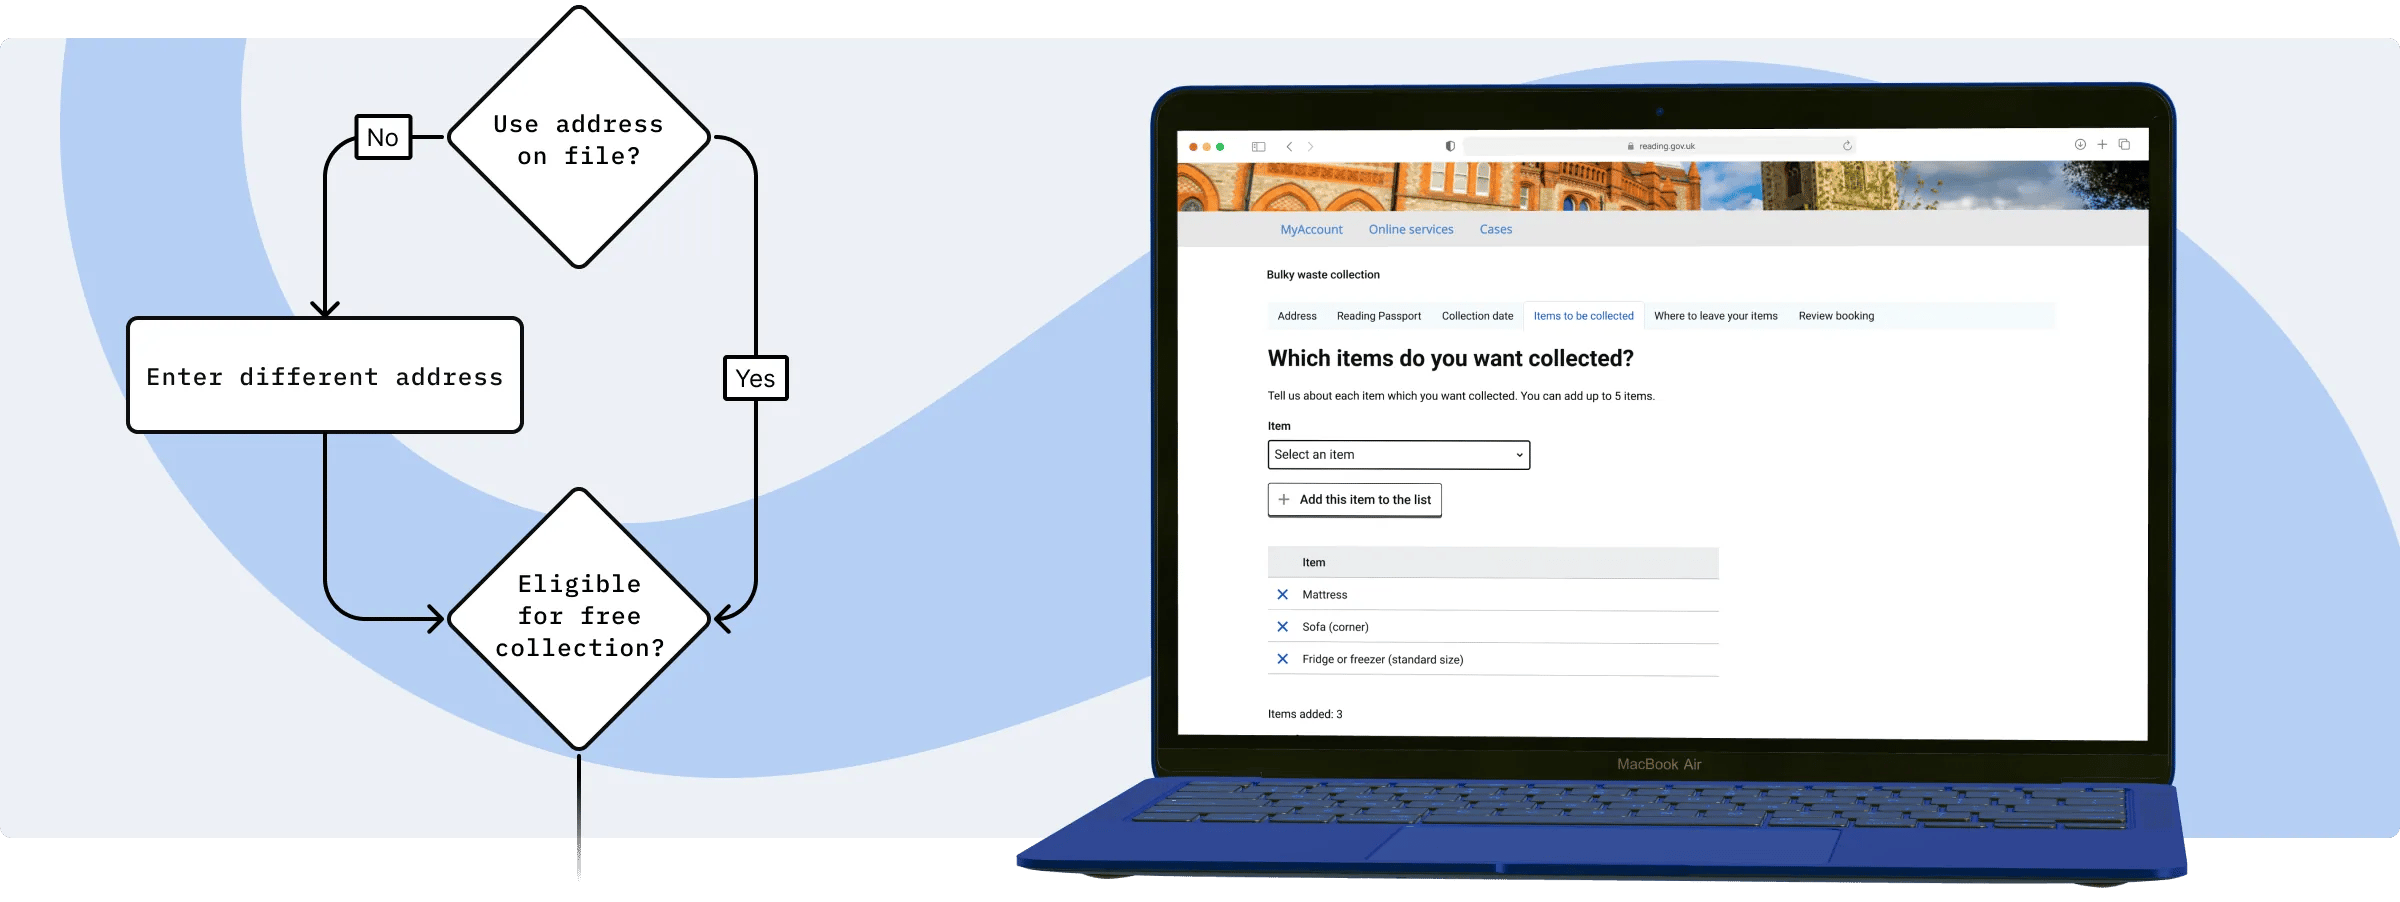 Mockup of the bulky waste collection form